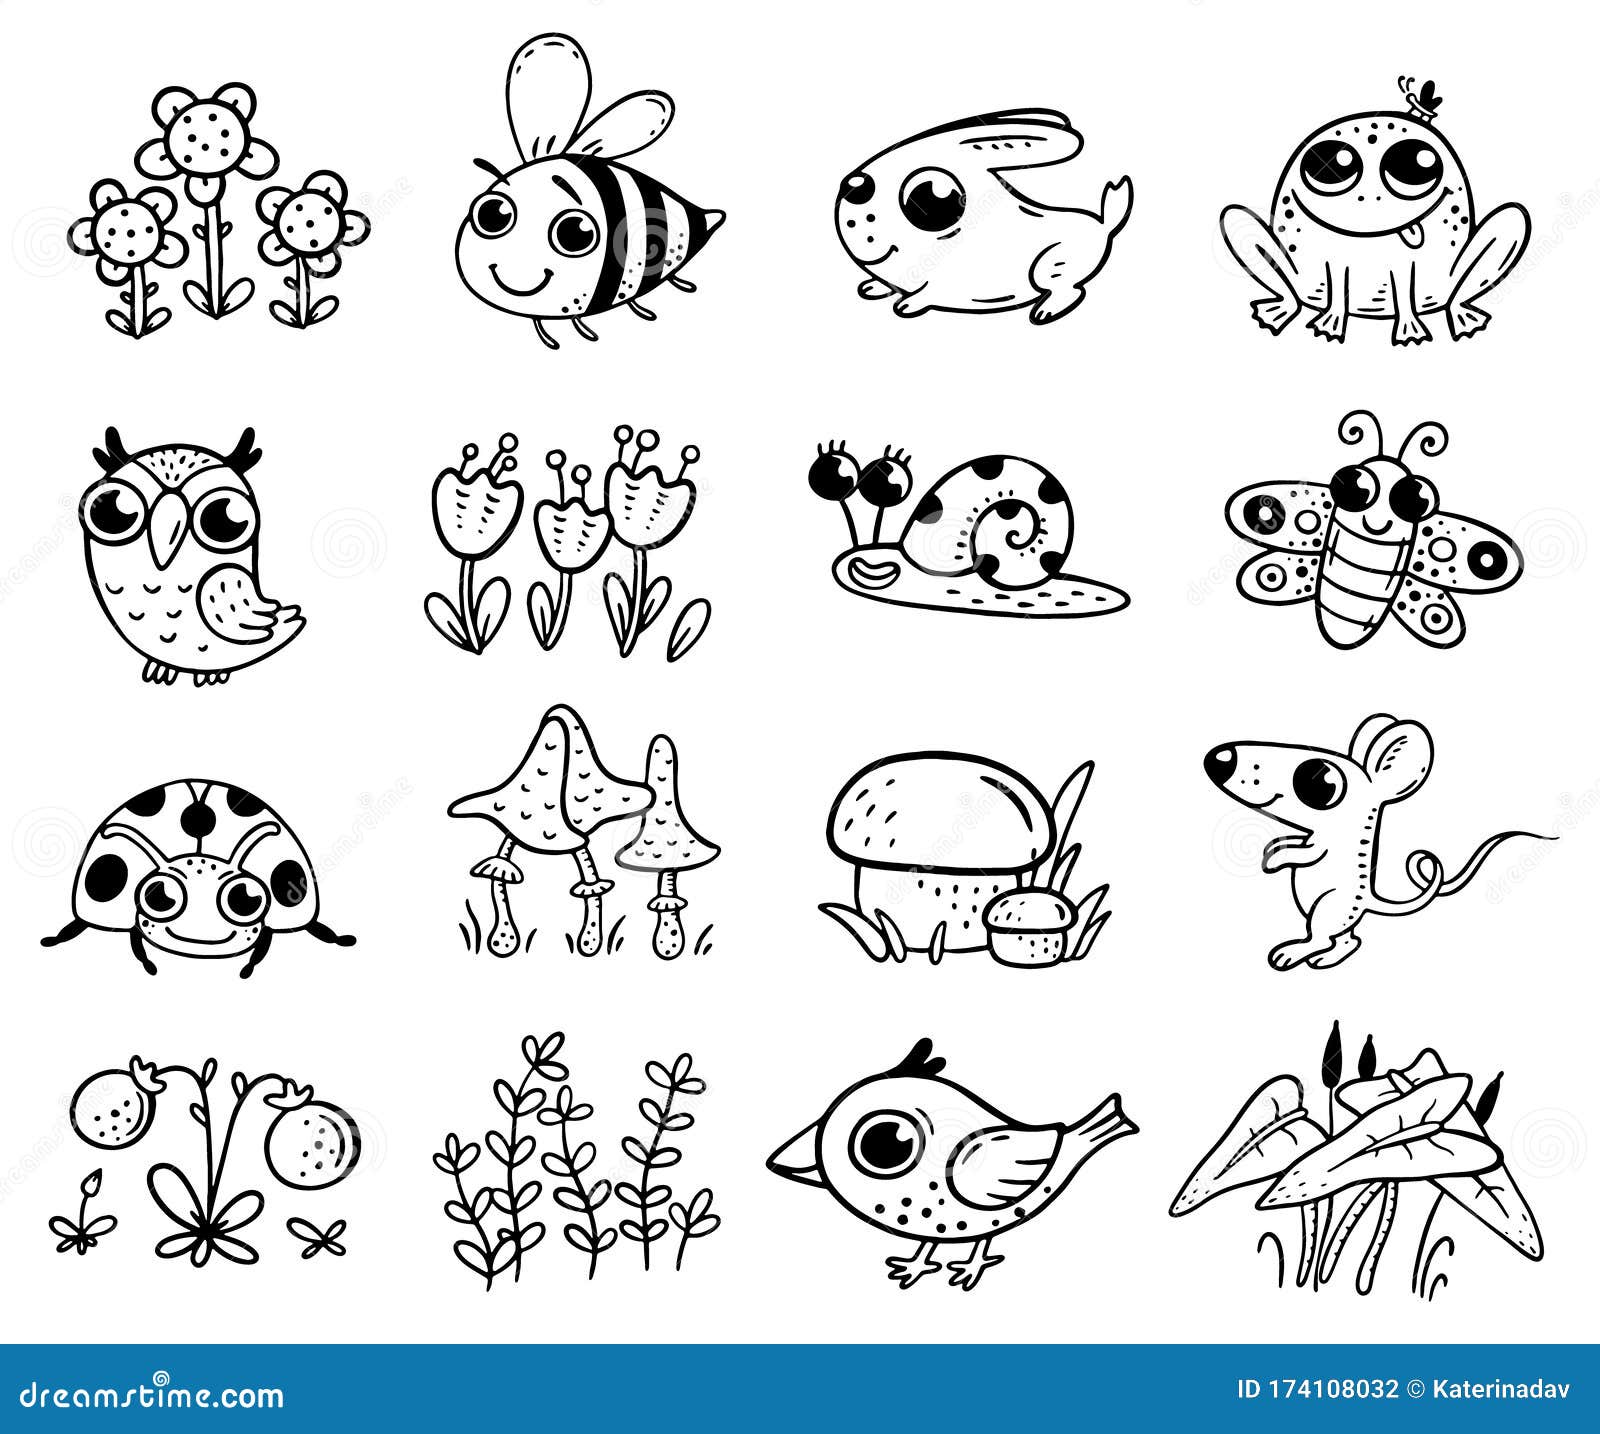 Set Of Cute Forest Or Woodland Animals And Plant Elements Suitable For Stickers Coloring Page Stock Vector Illustration Of Mushroom Graphic 174108032